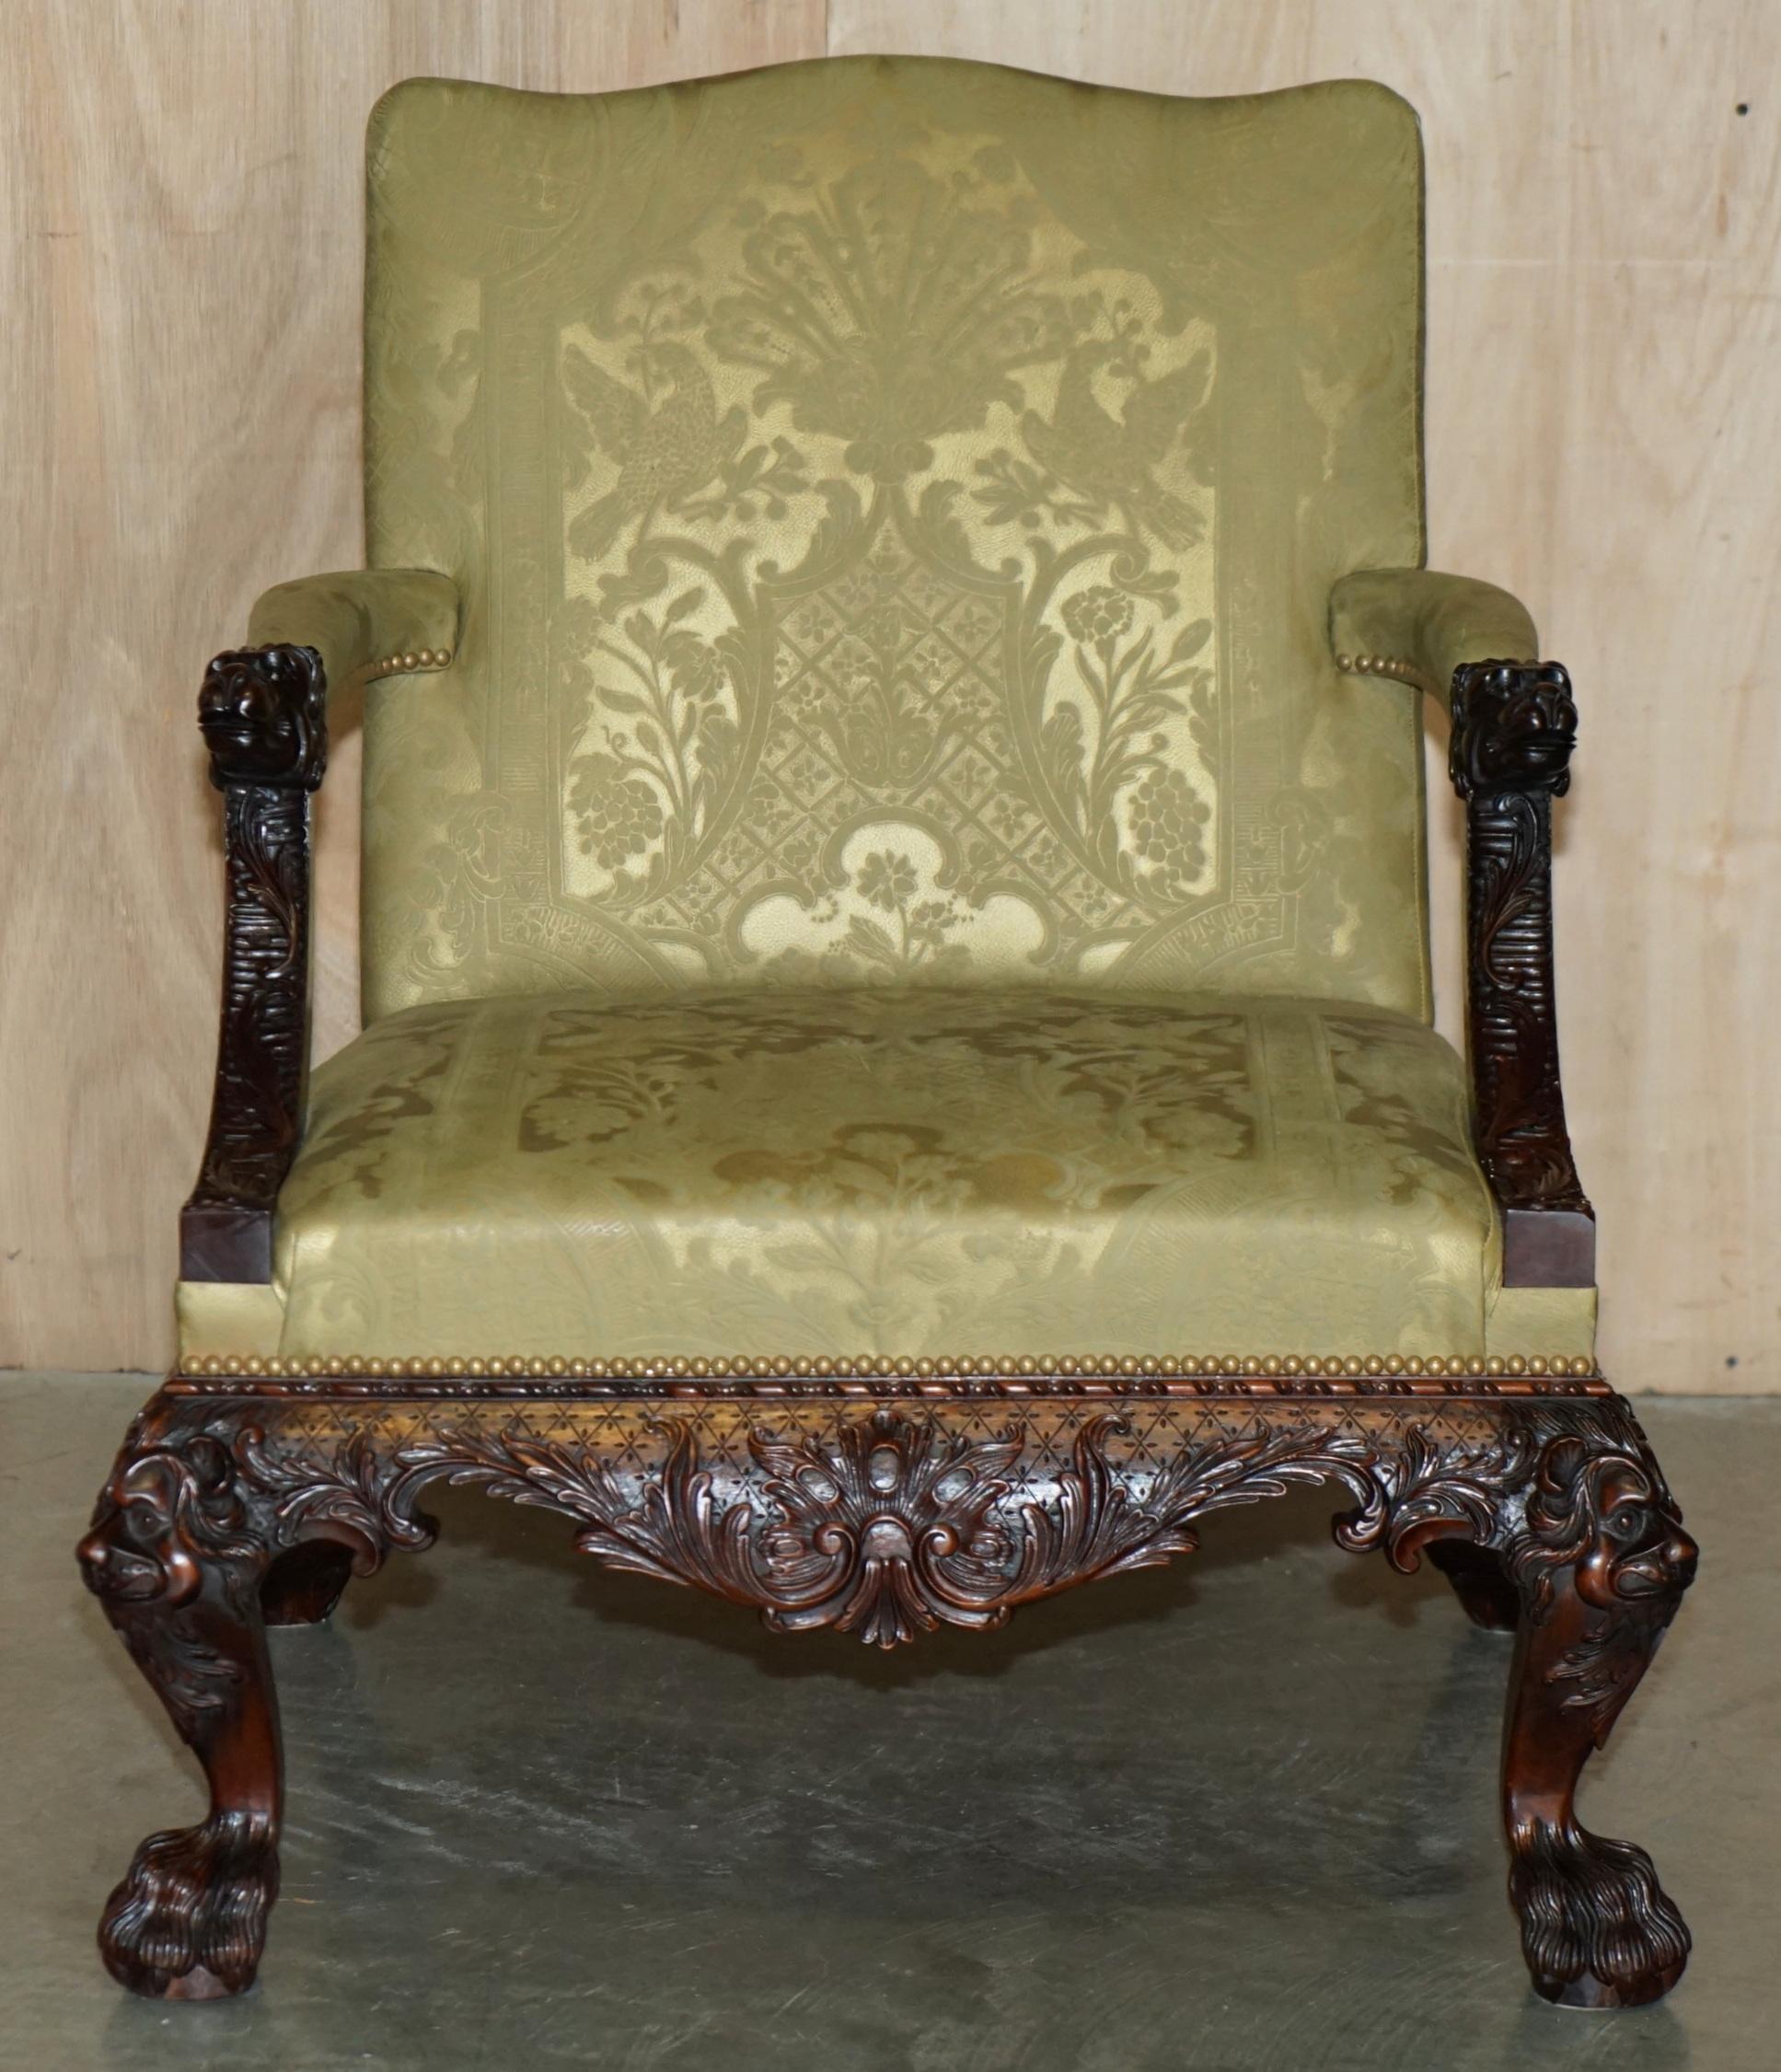 FINE PAiR OF LARGE CARved GAINSBOROUGH ARMCHAIRS AFTER GILES GRENDEY 1693-1780 (Georgian) im Angebot